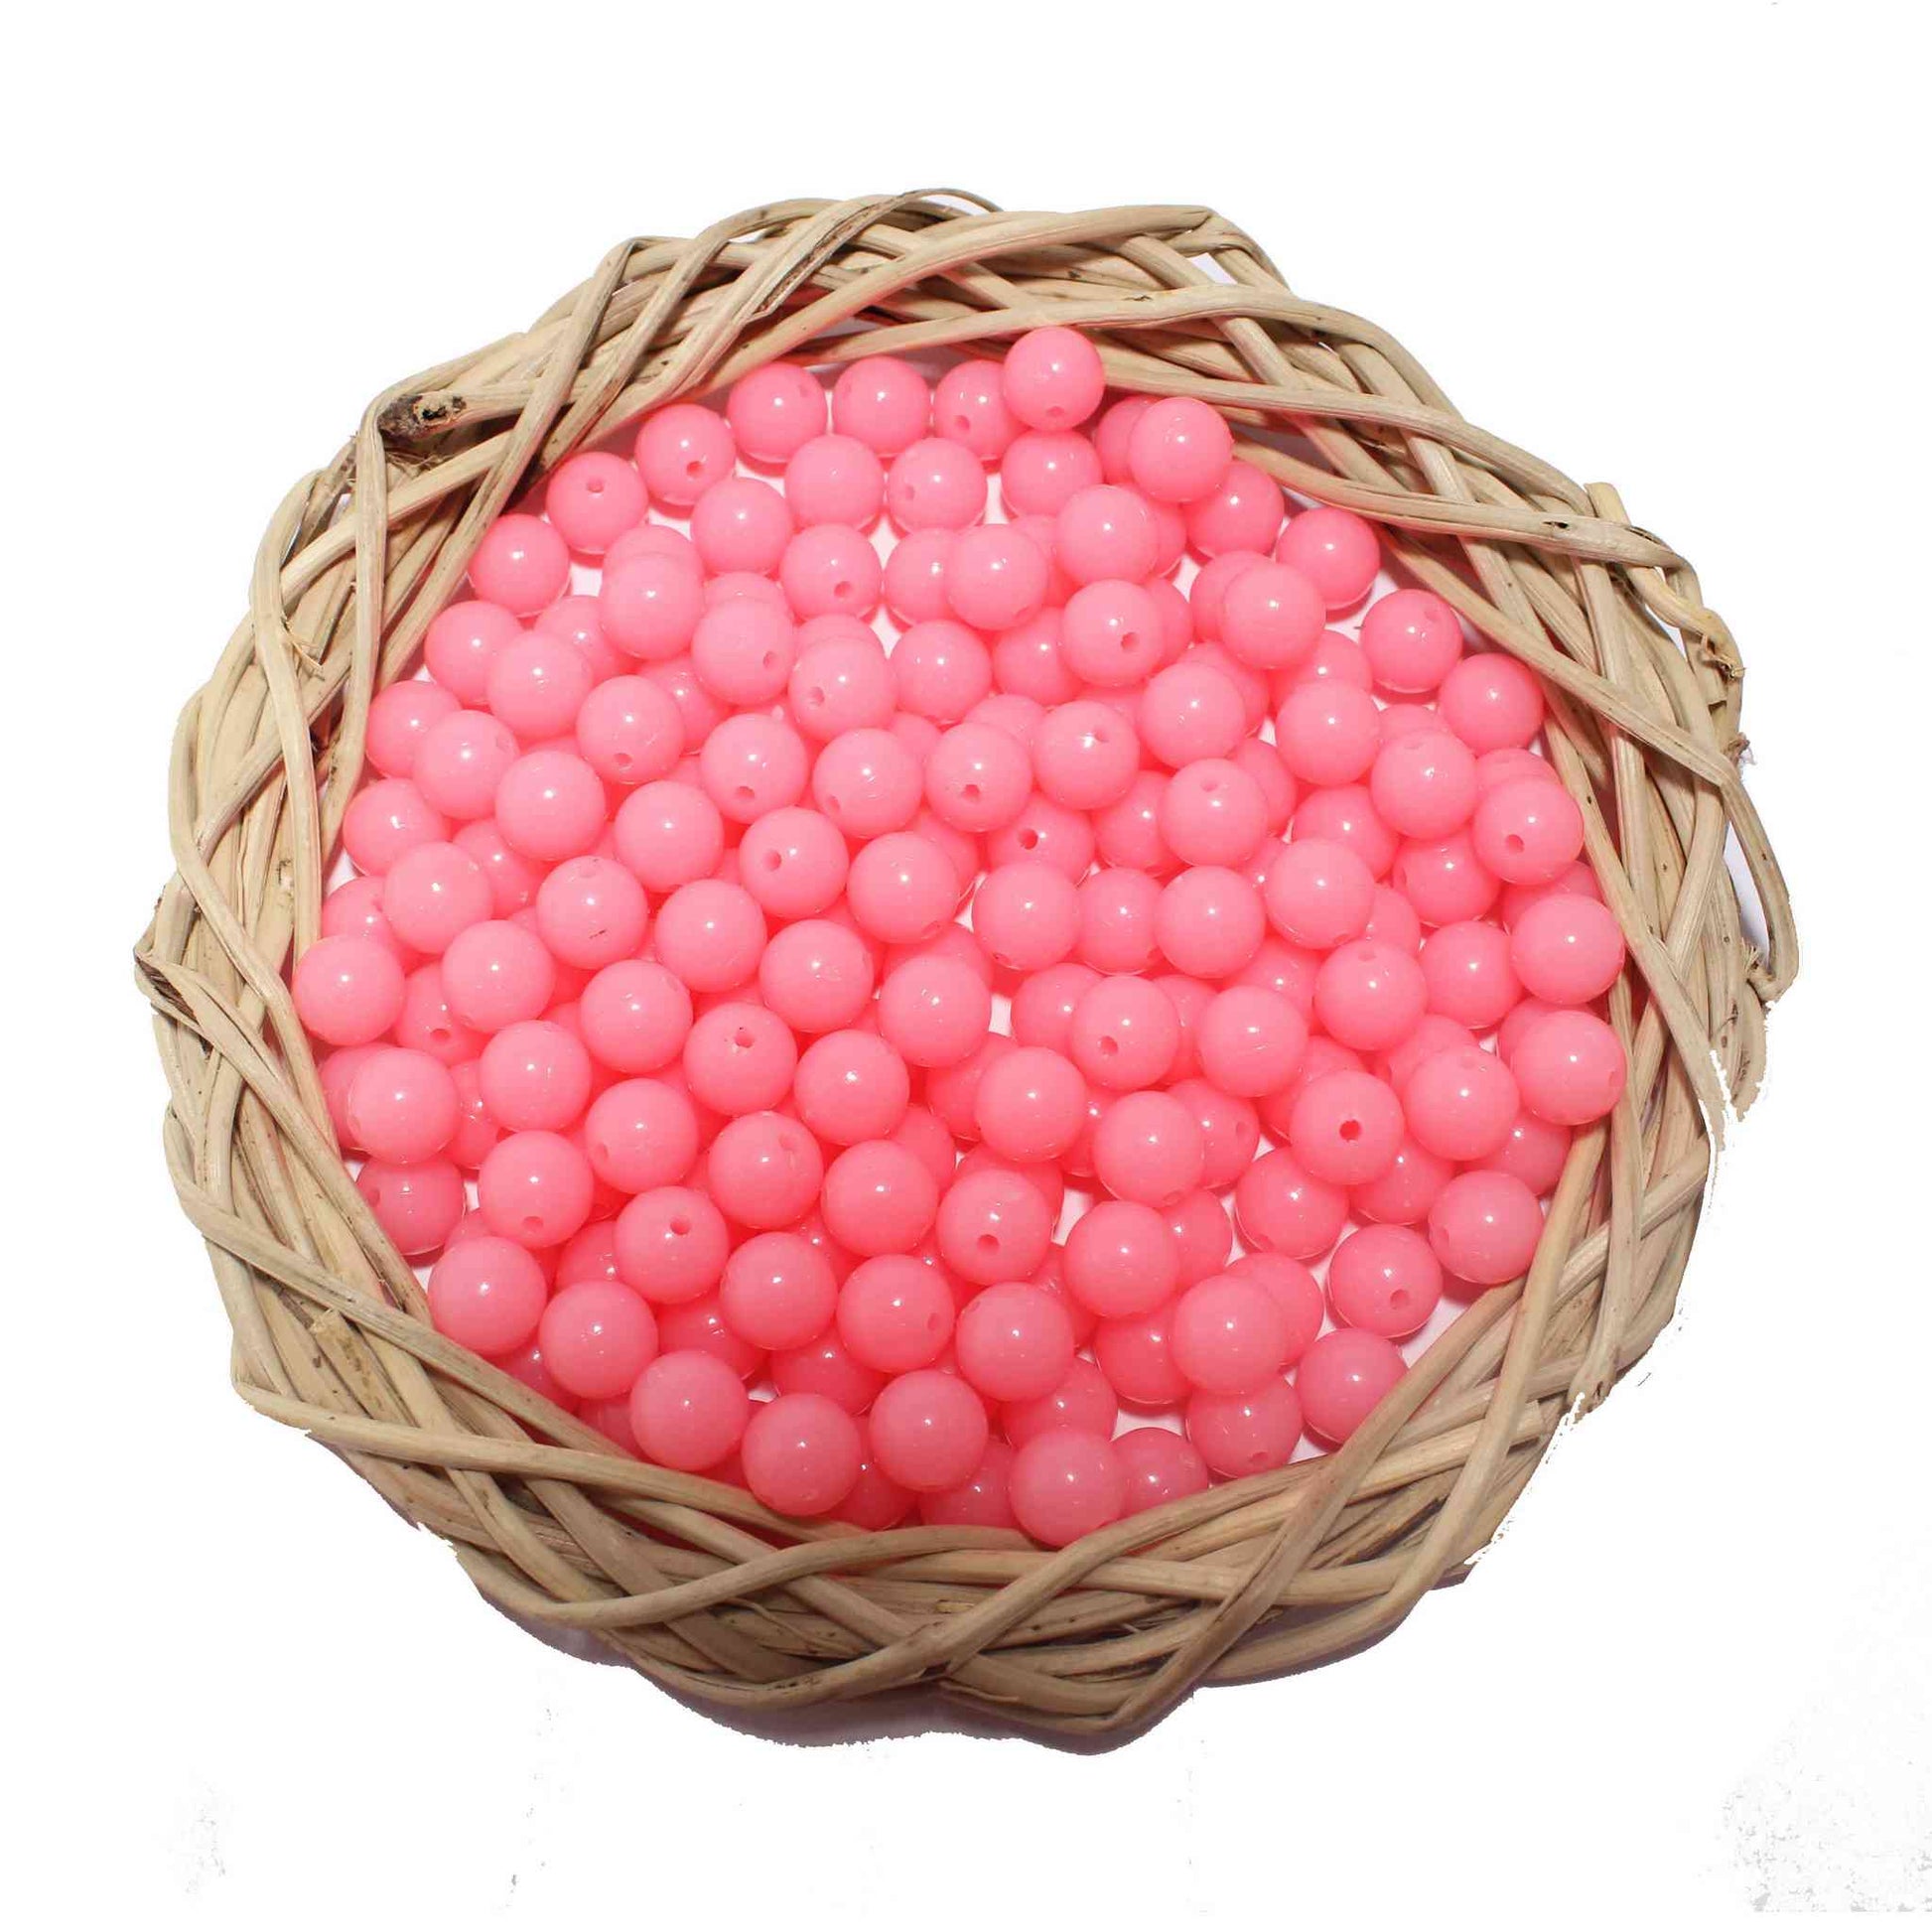 Premium quality Round Glass Beads for DIY Craft, Trousseau Packing or Decoration - Design 734, Light Pink - Indian Petals